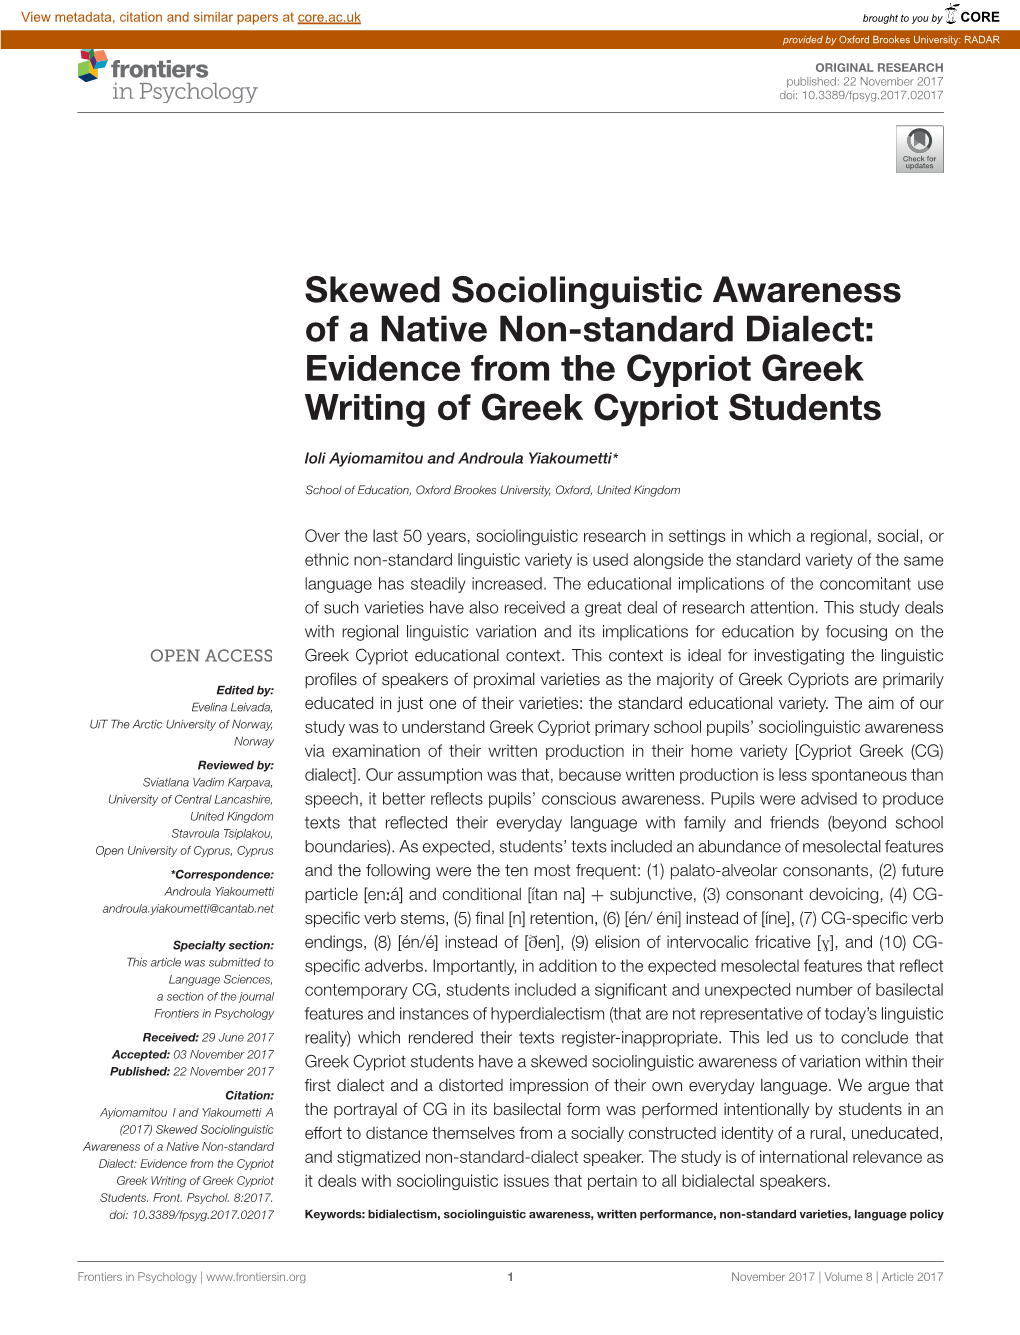 Skewed Sociolinguistic Awareness of a Native Non-Standard Dialect: Evidence from the Cypriot Greek Writing of Greek Cypriot Students